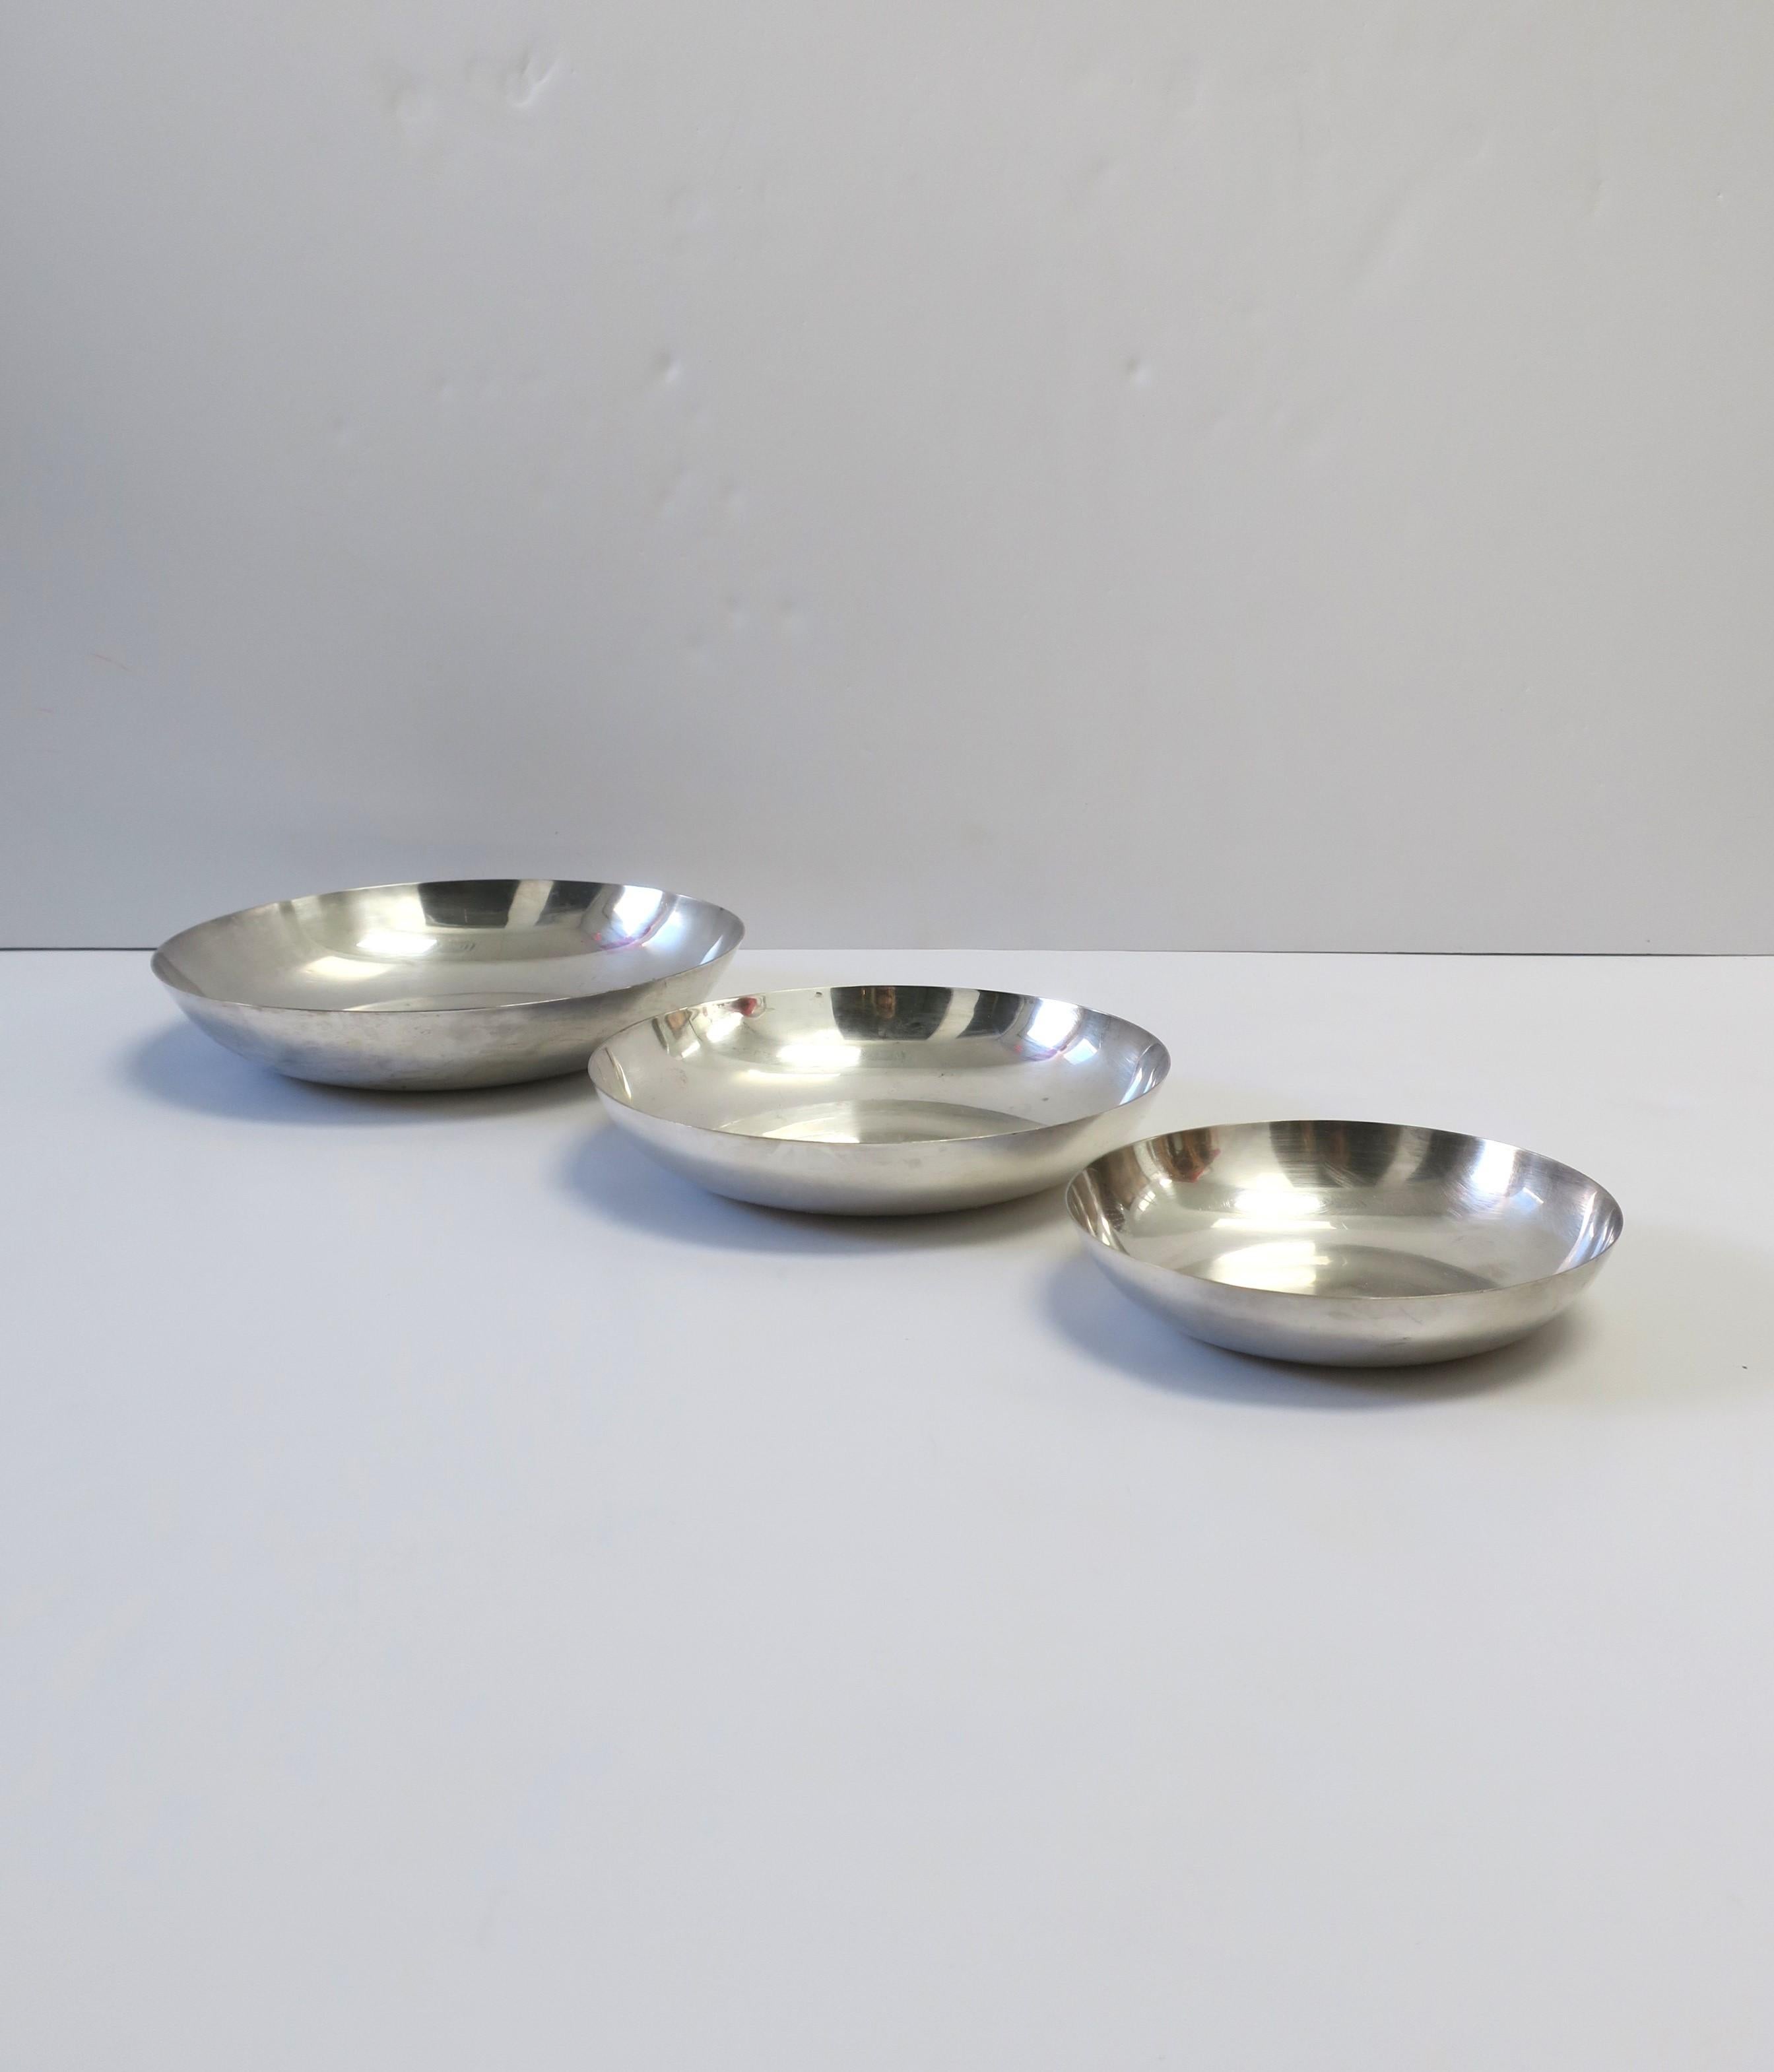 A set of three (3) graduated sterling silver plate over brass serving bowls in the Minimalist style, by Reed & Barton, circa late-20th century, USA. The sterling silver plate really make these bowls shine, a great set for entertaining on a table,